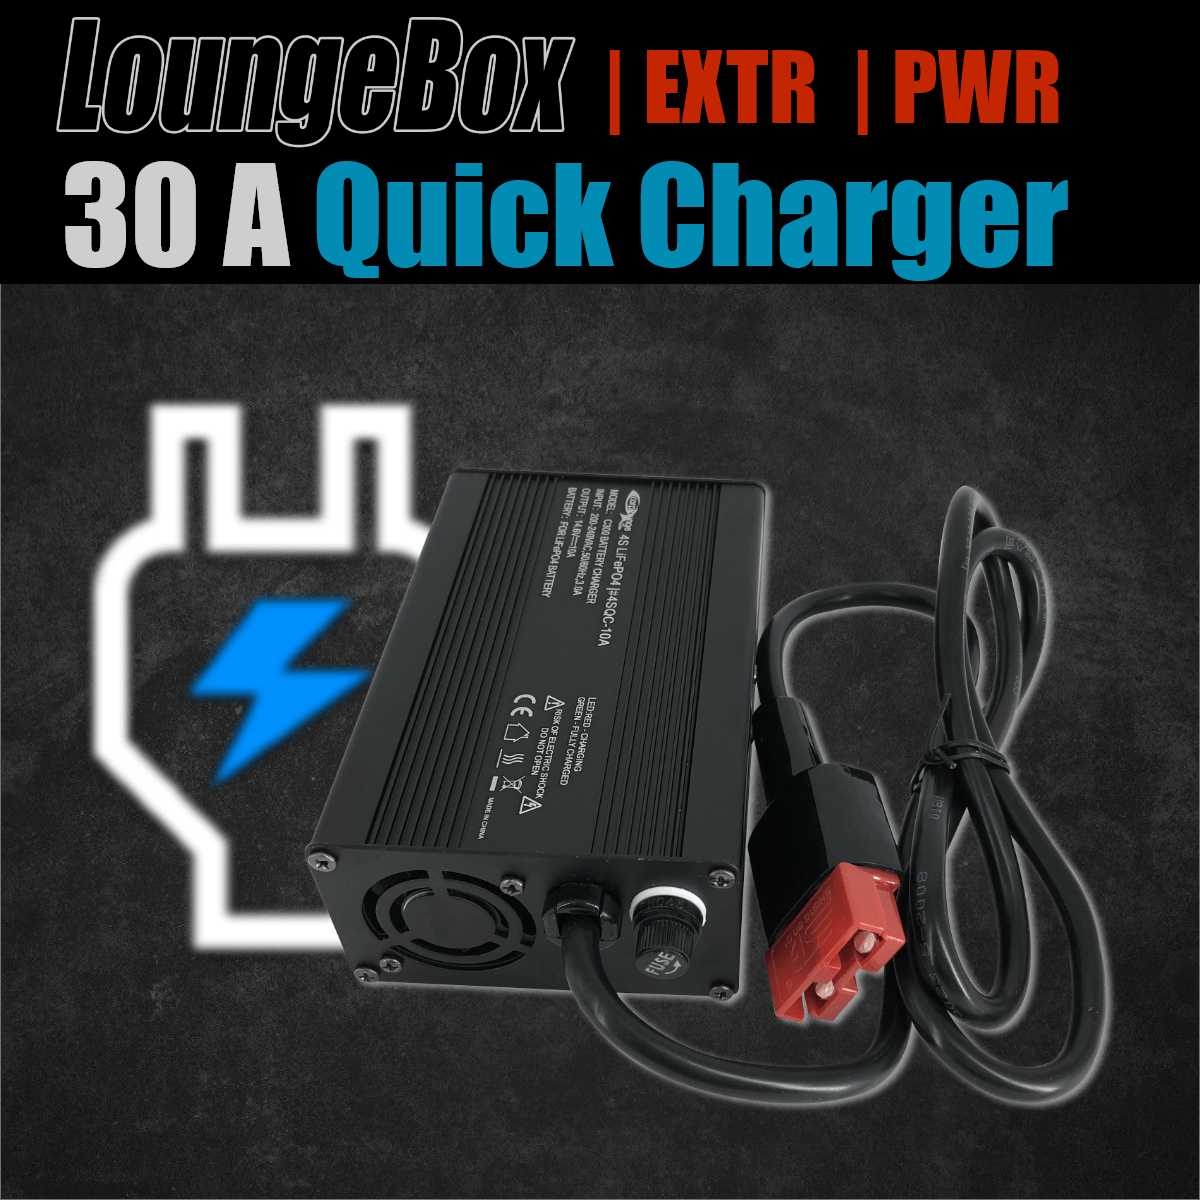 30A LifePo Quick Charger for the Loungebox PWR and Expedition